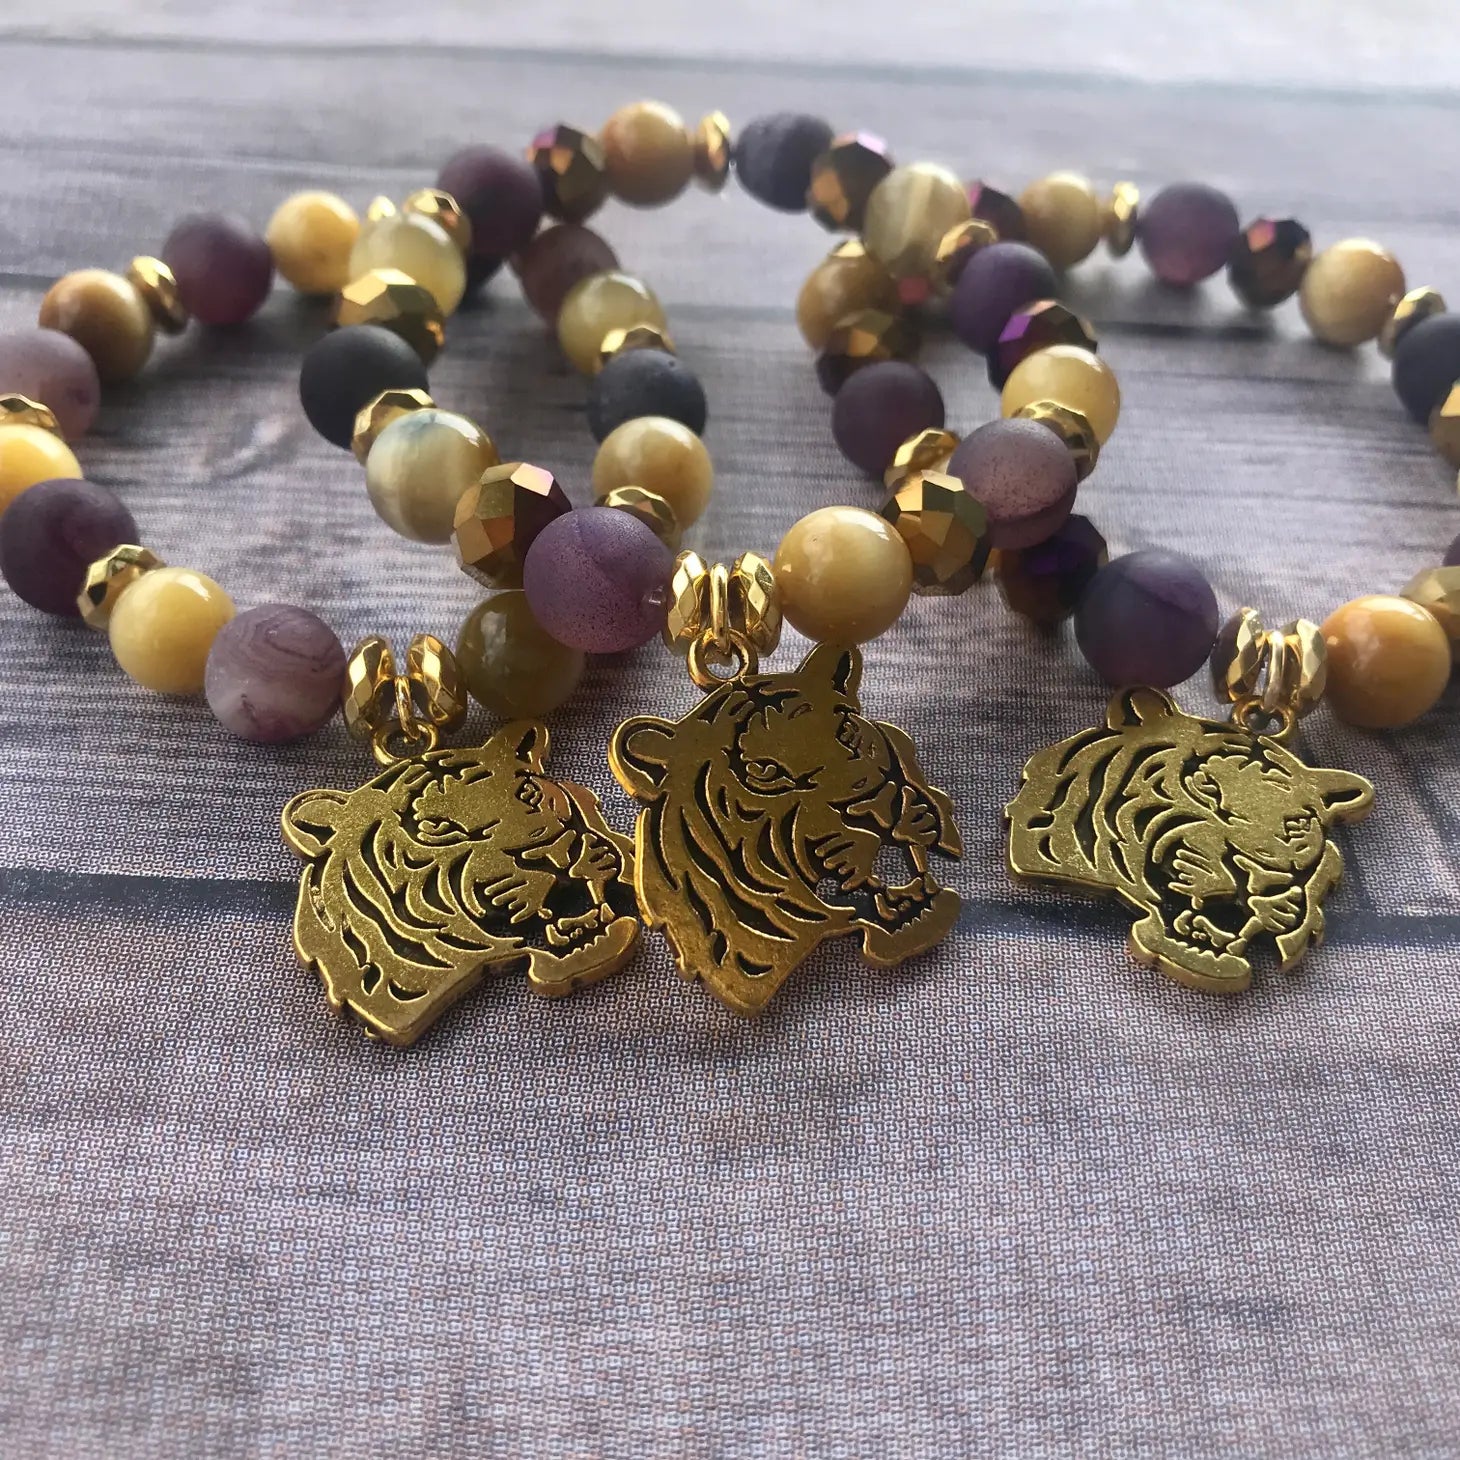 boutique shopping pensacola tigers charm bracelet jewelry accessories gifts 